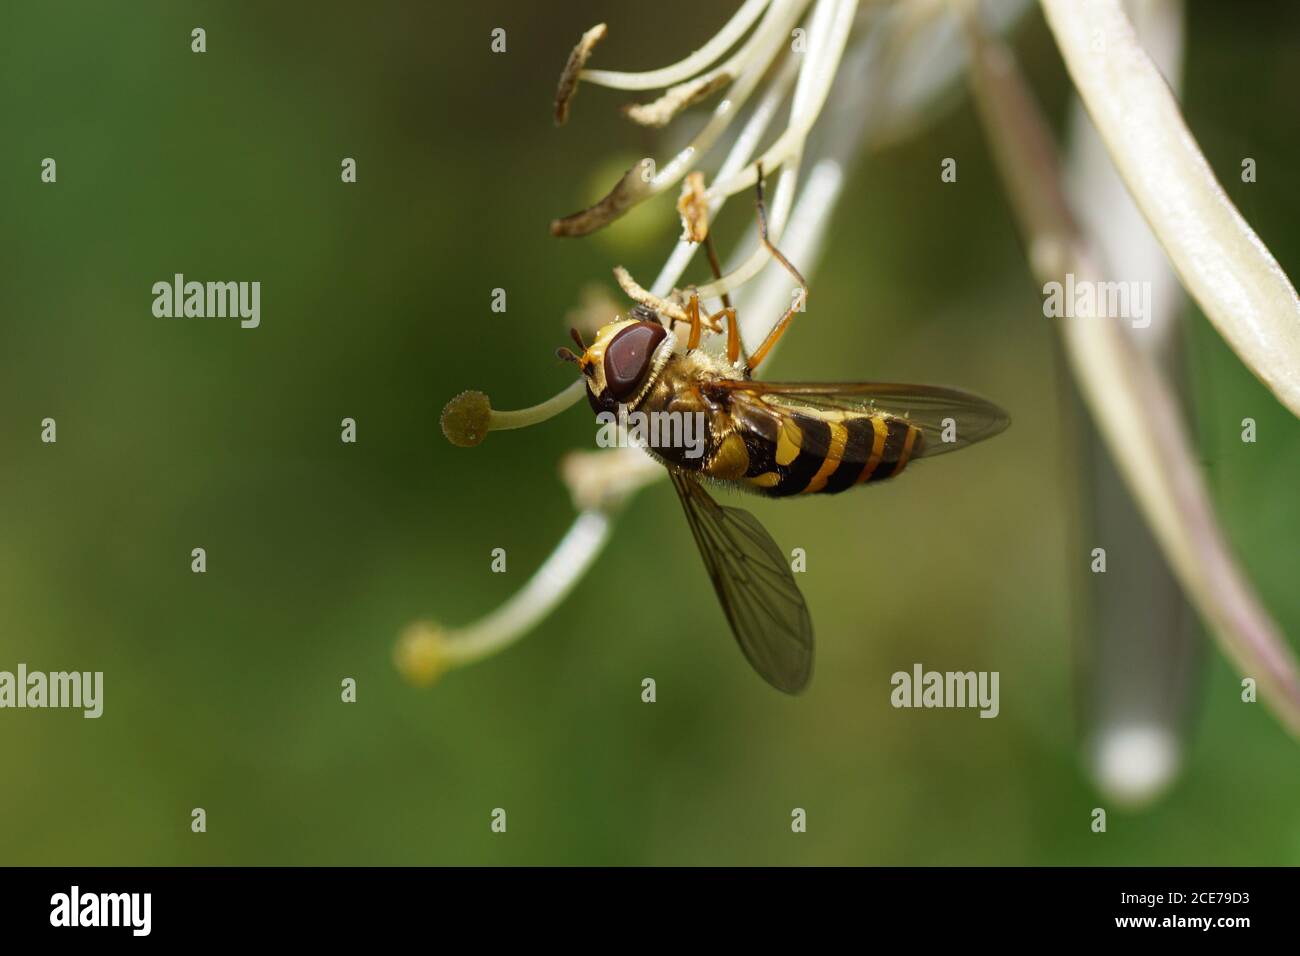 Hoverfly, Syrphus ribesii, family Syrphidae on pistil and stamens of a flower of honeysuckle (Lonicera periclymenum), family Caprifoliaceae. Holland Stock Photo